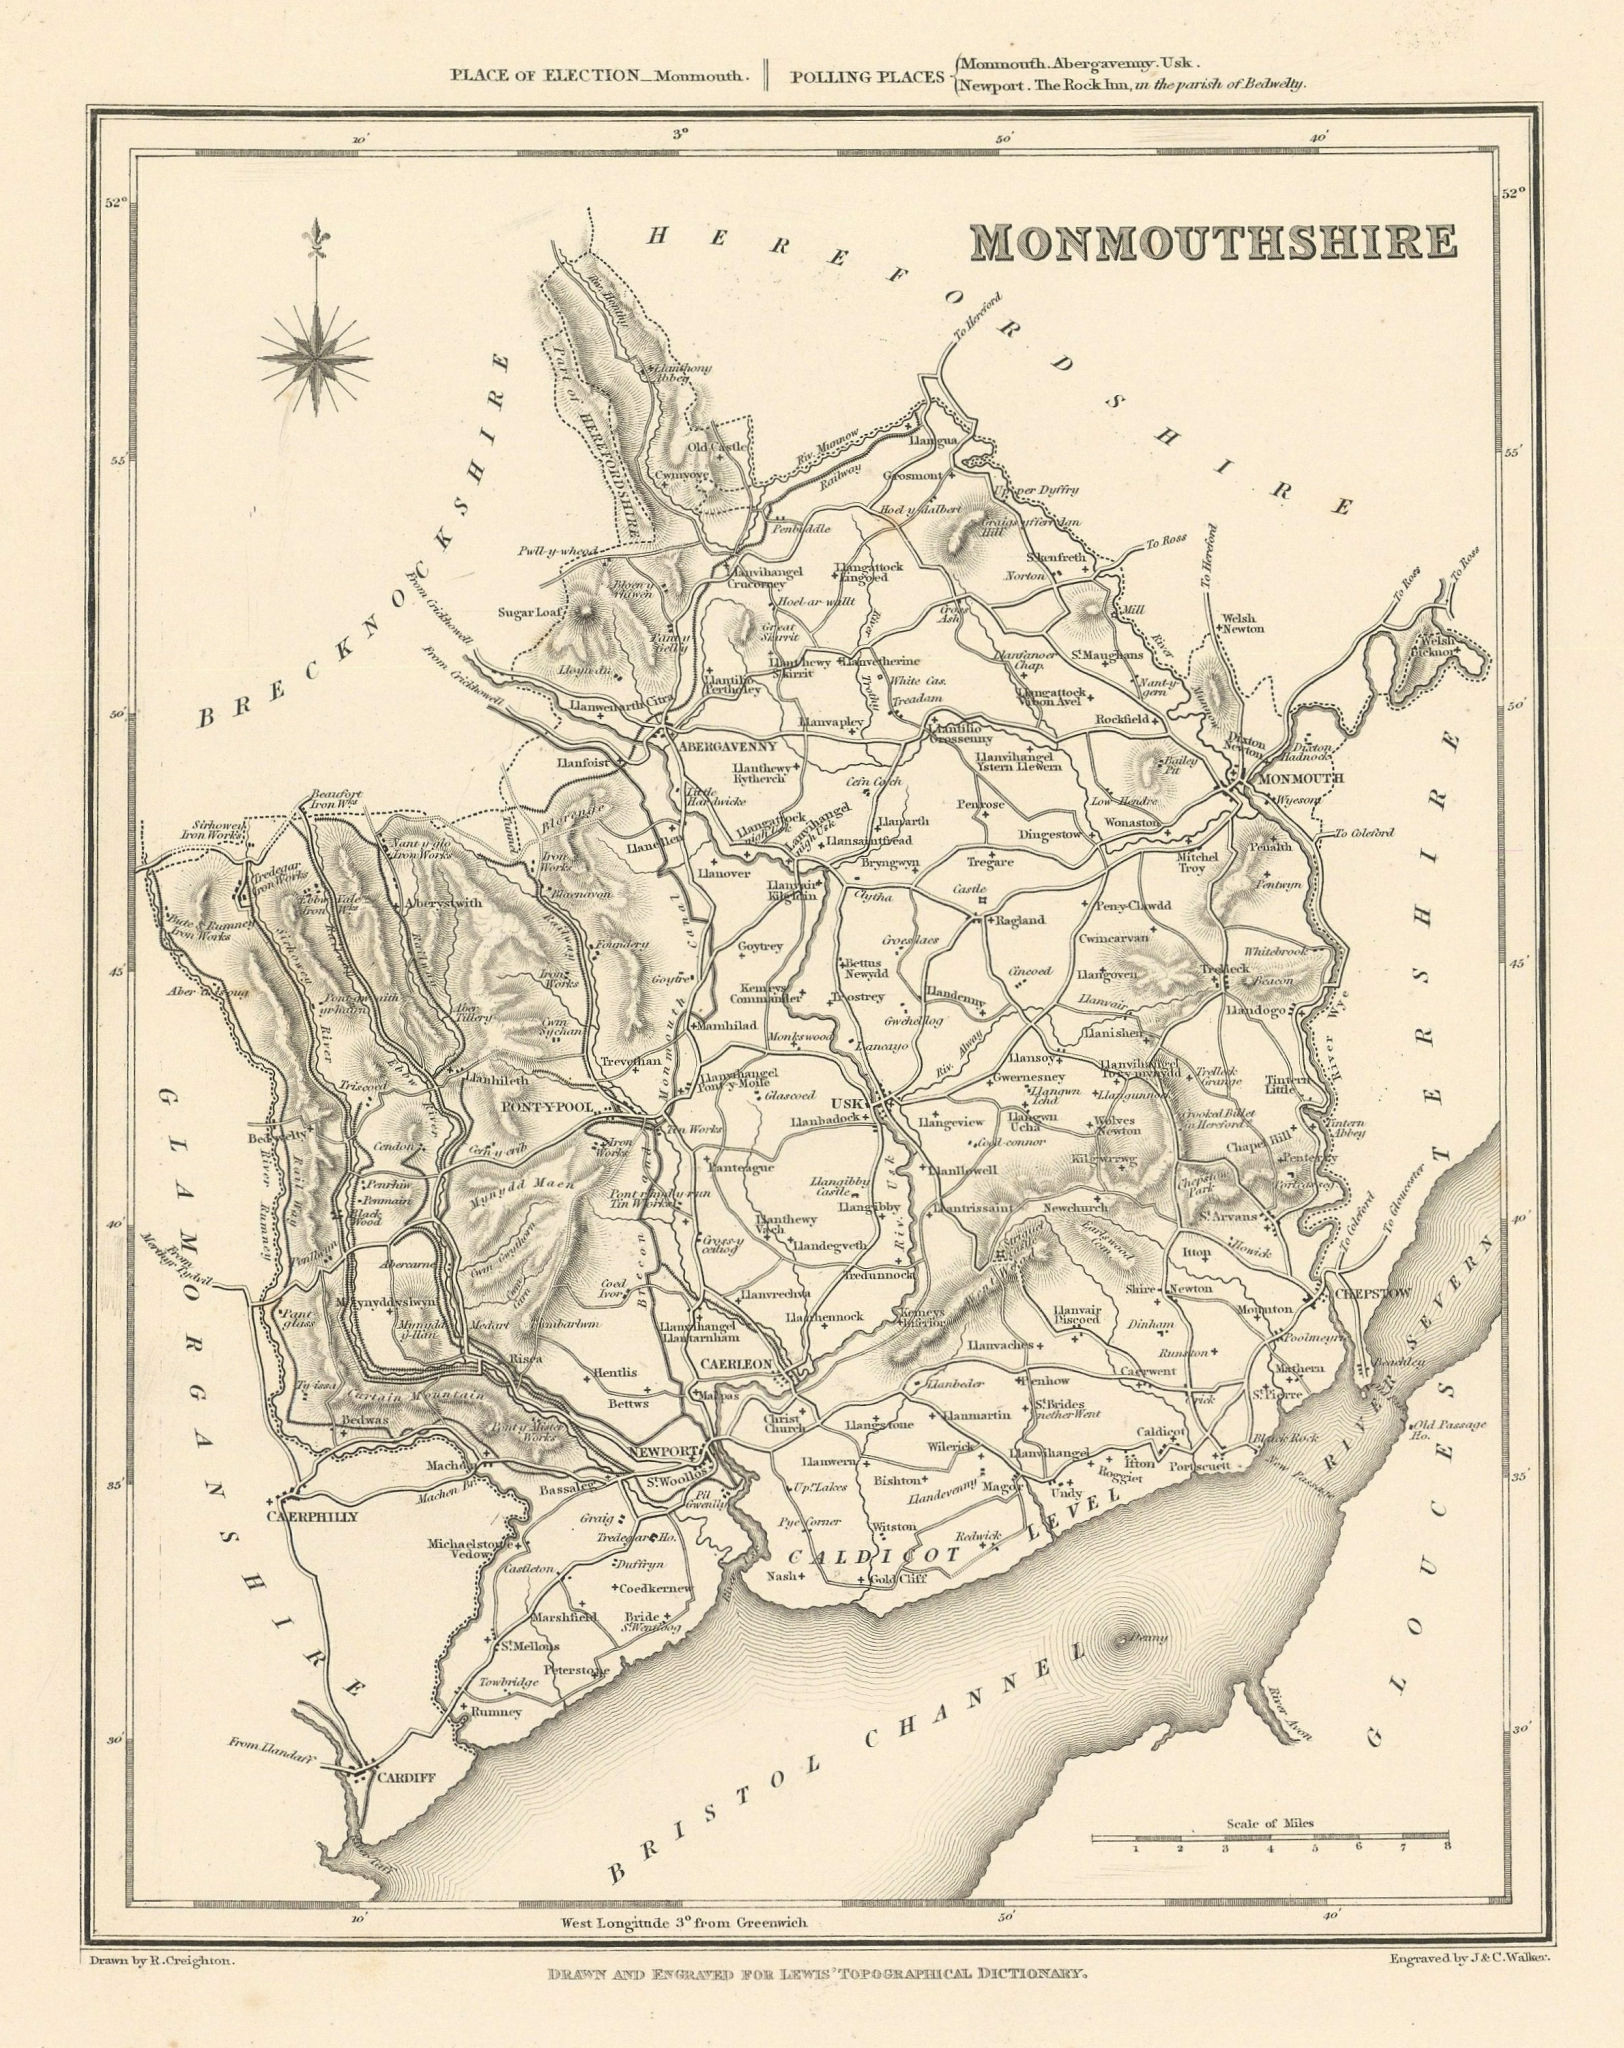 Associate Product Antique county map of MONMOUTHSHIRE by Walker & Creighton for Lewis c1840